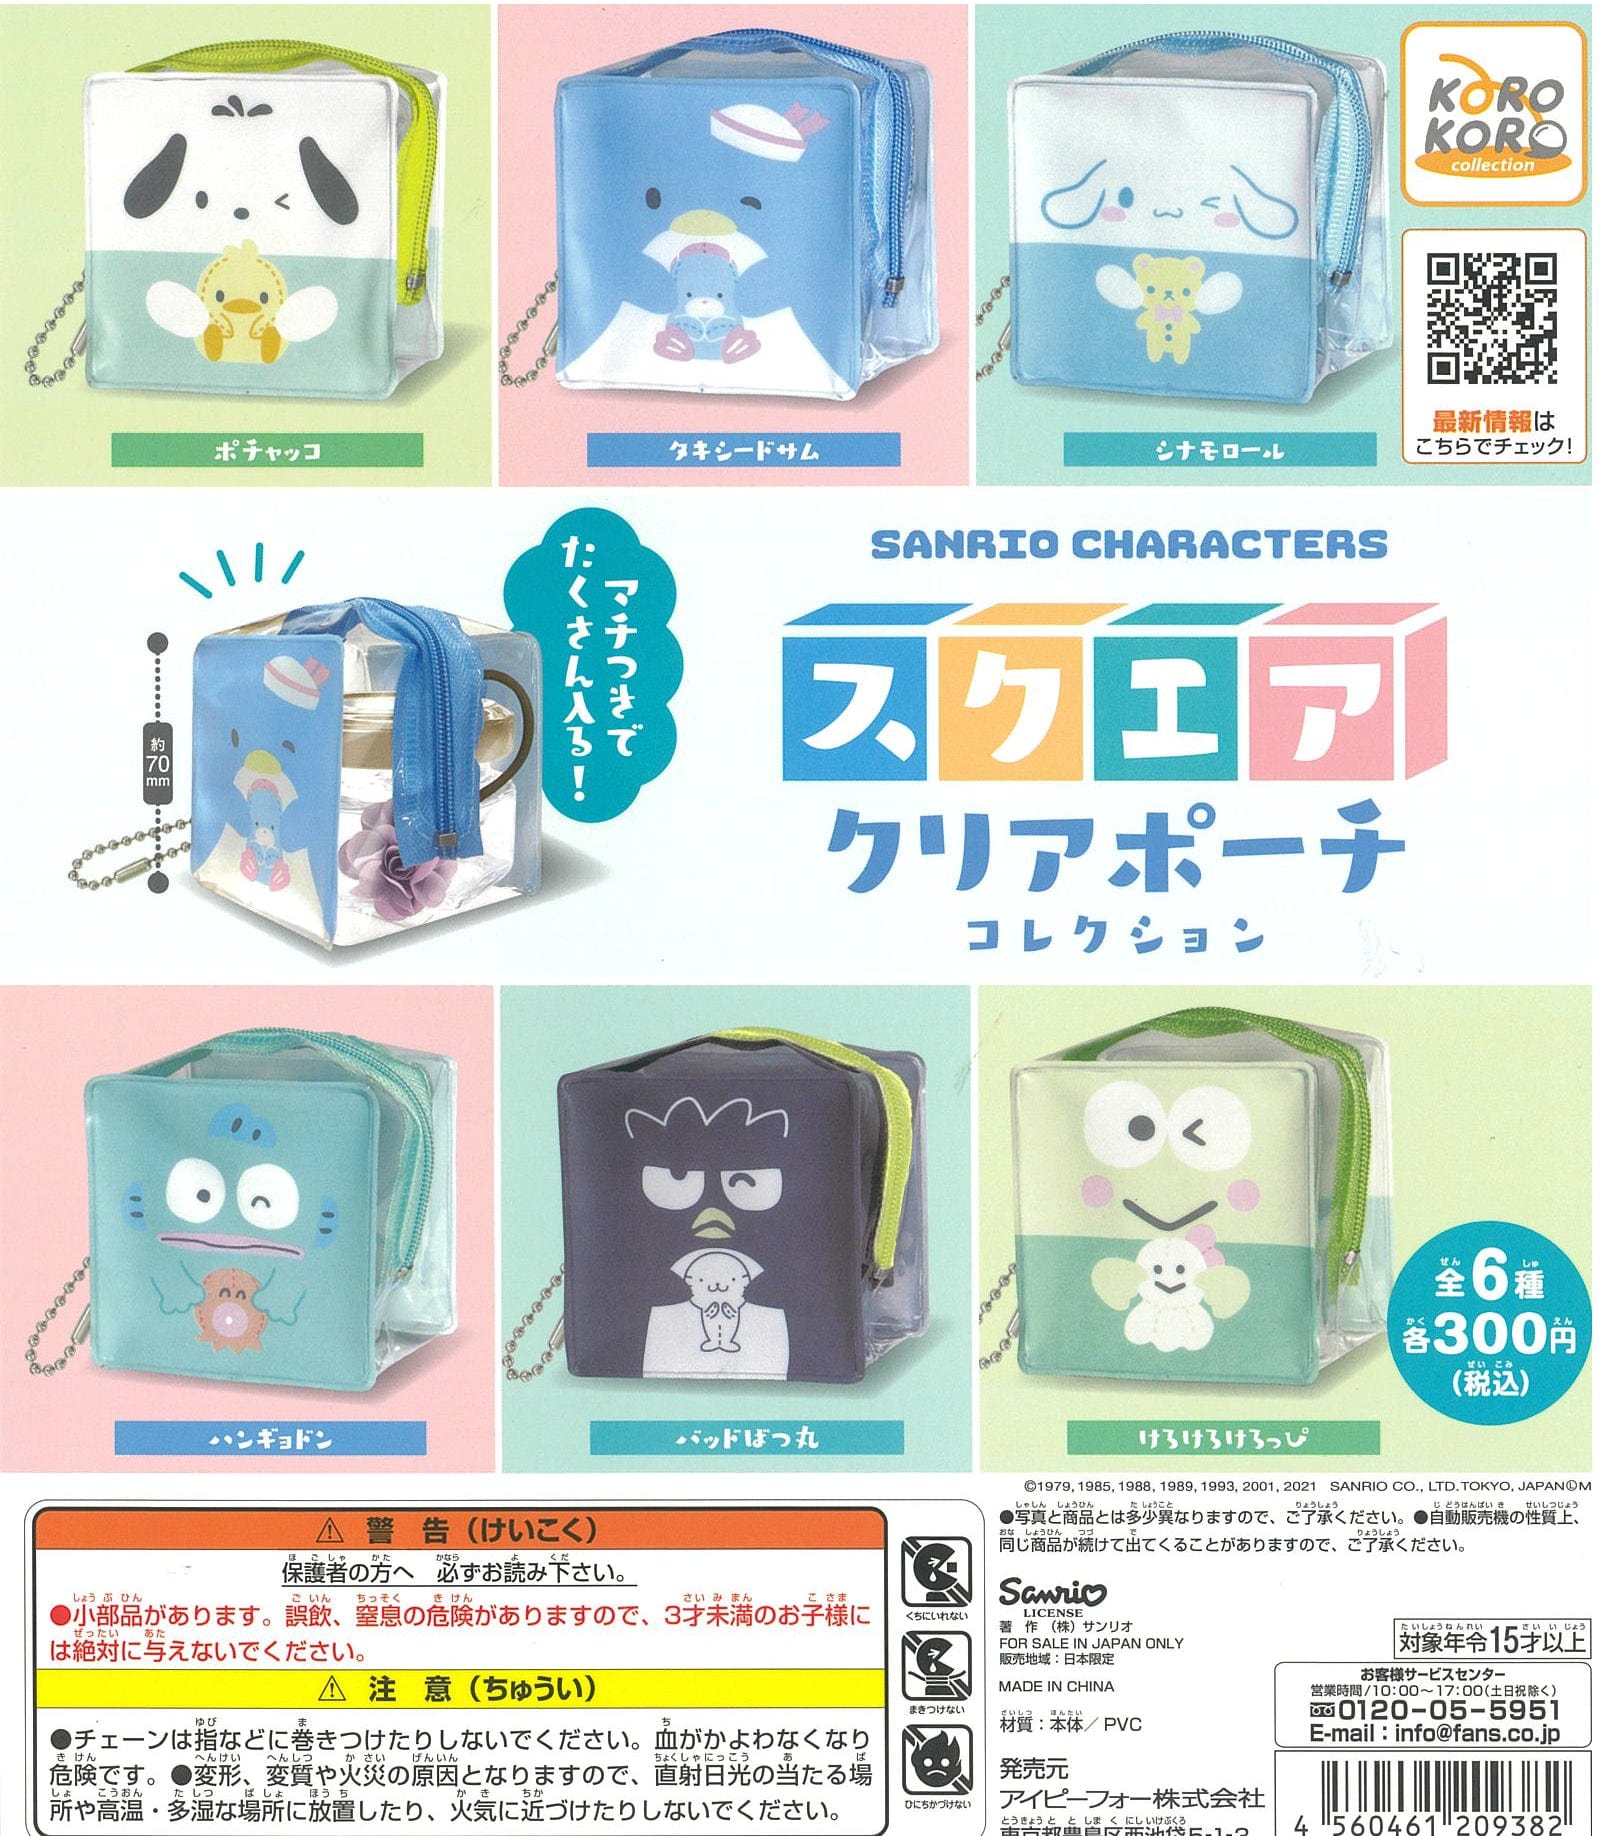 KoroKoro Collection CP1202 Sanrio Characters Square Clear Pouch Collection